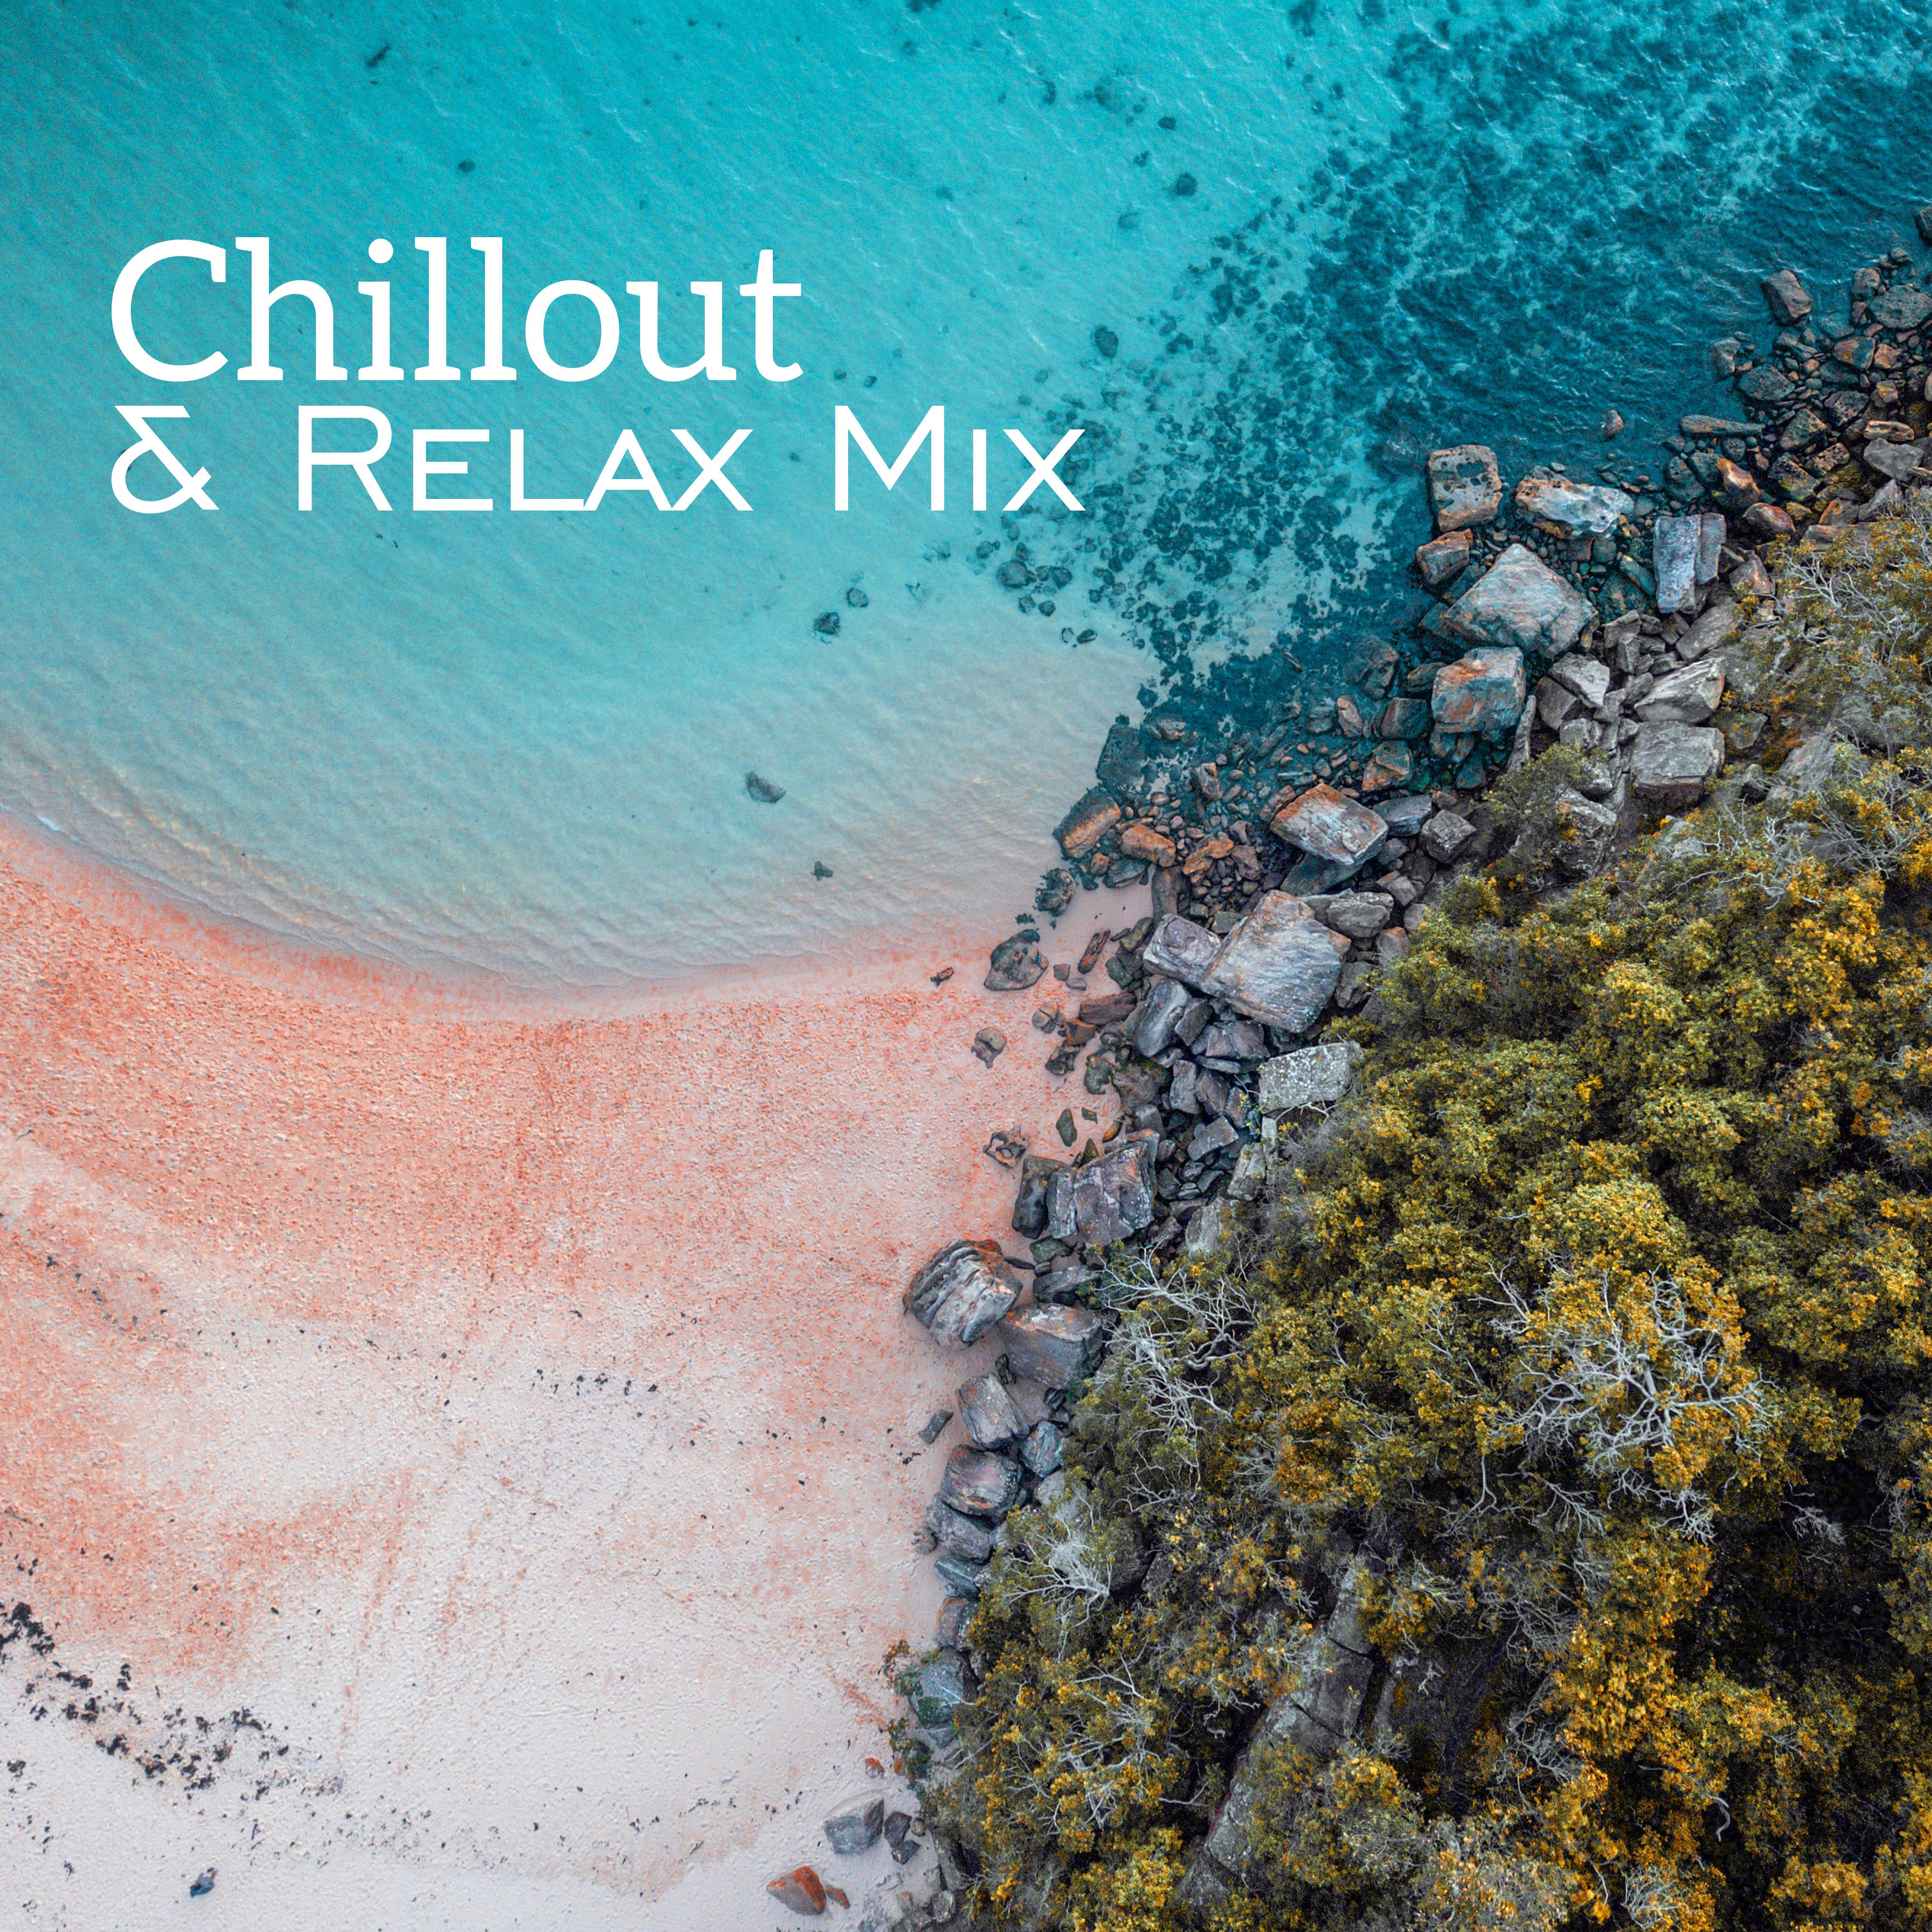 Chillout & Relax Mix